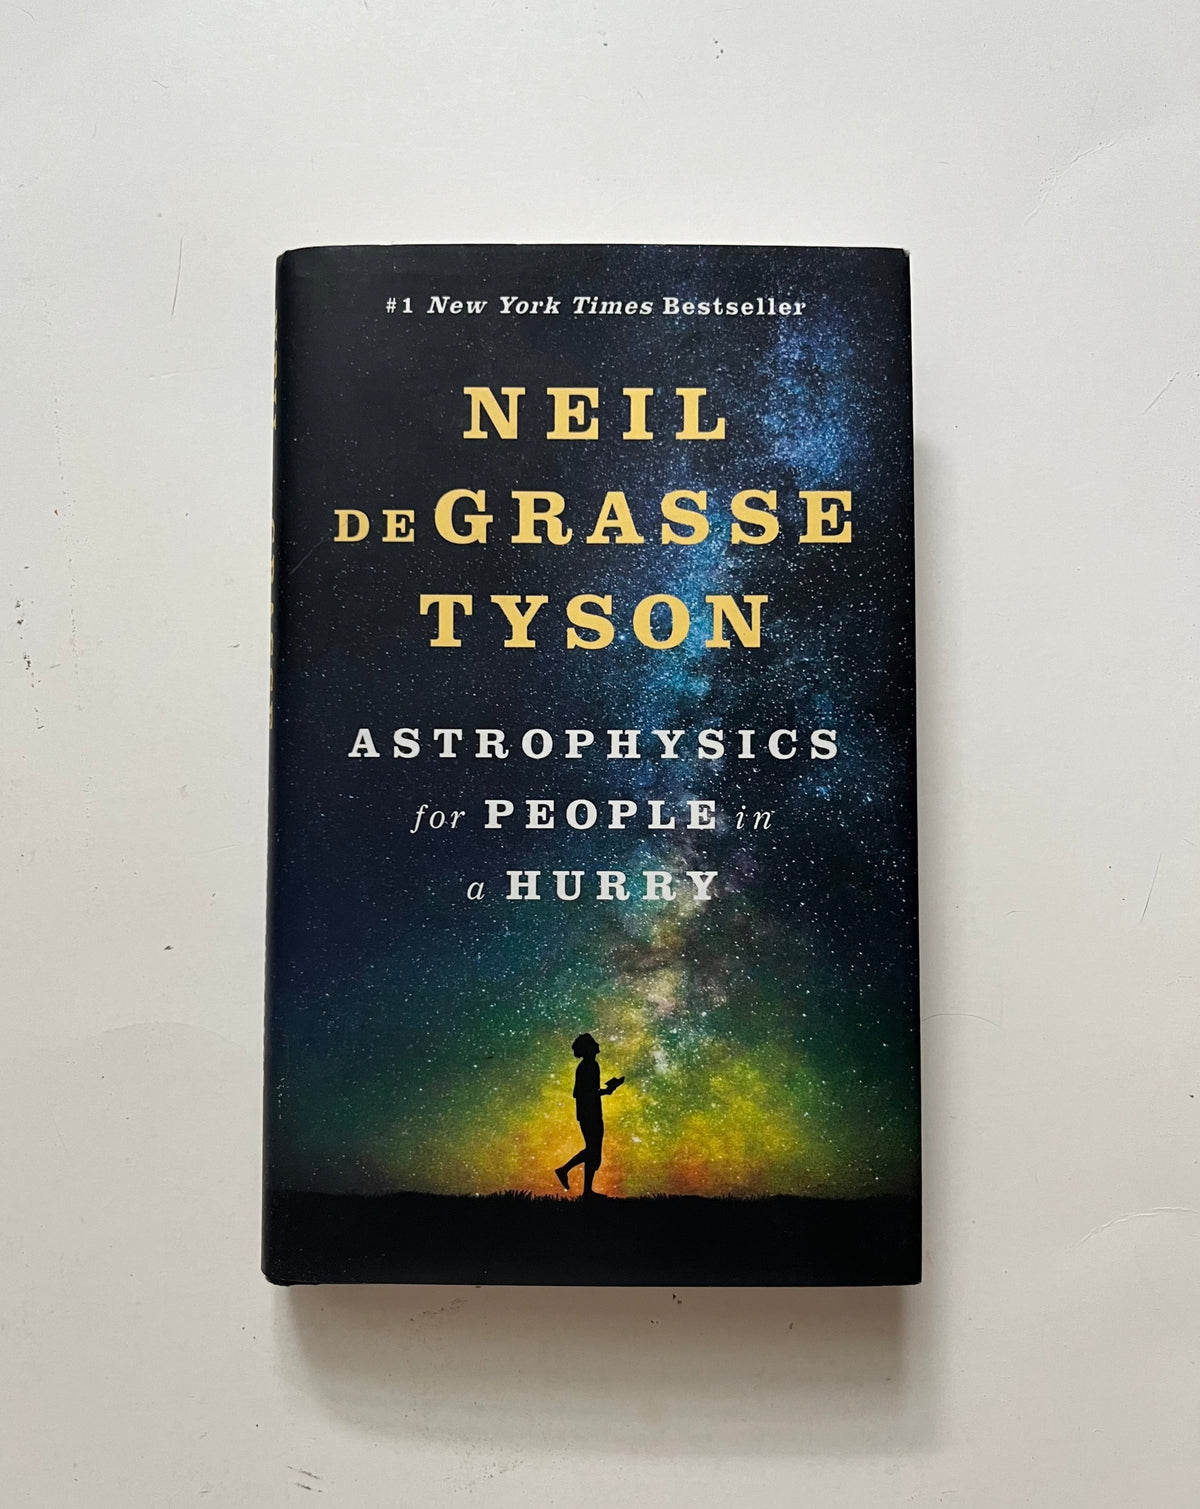 Astrophysics for People in a Hurry by Neil DeGrasse Tyson